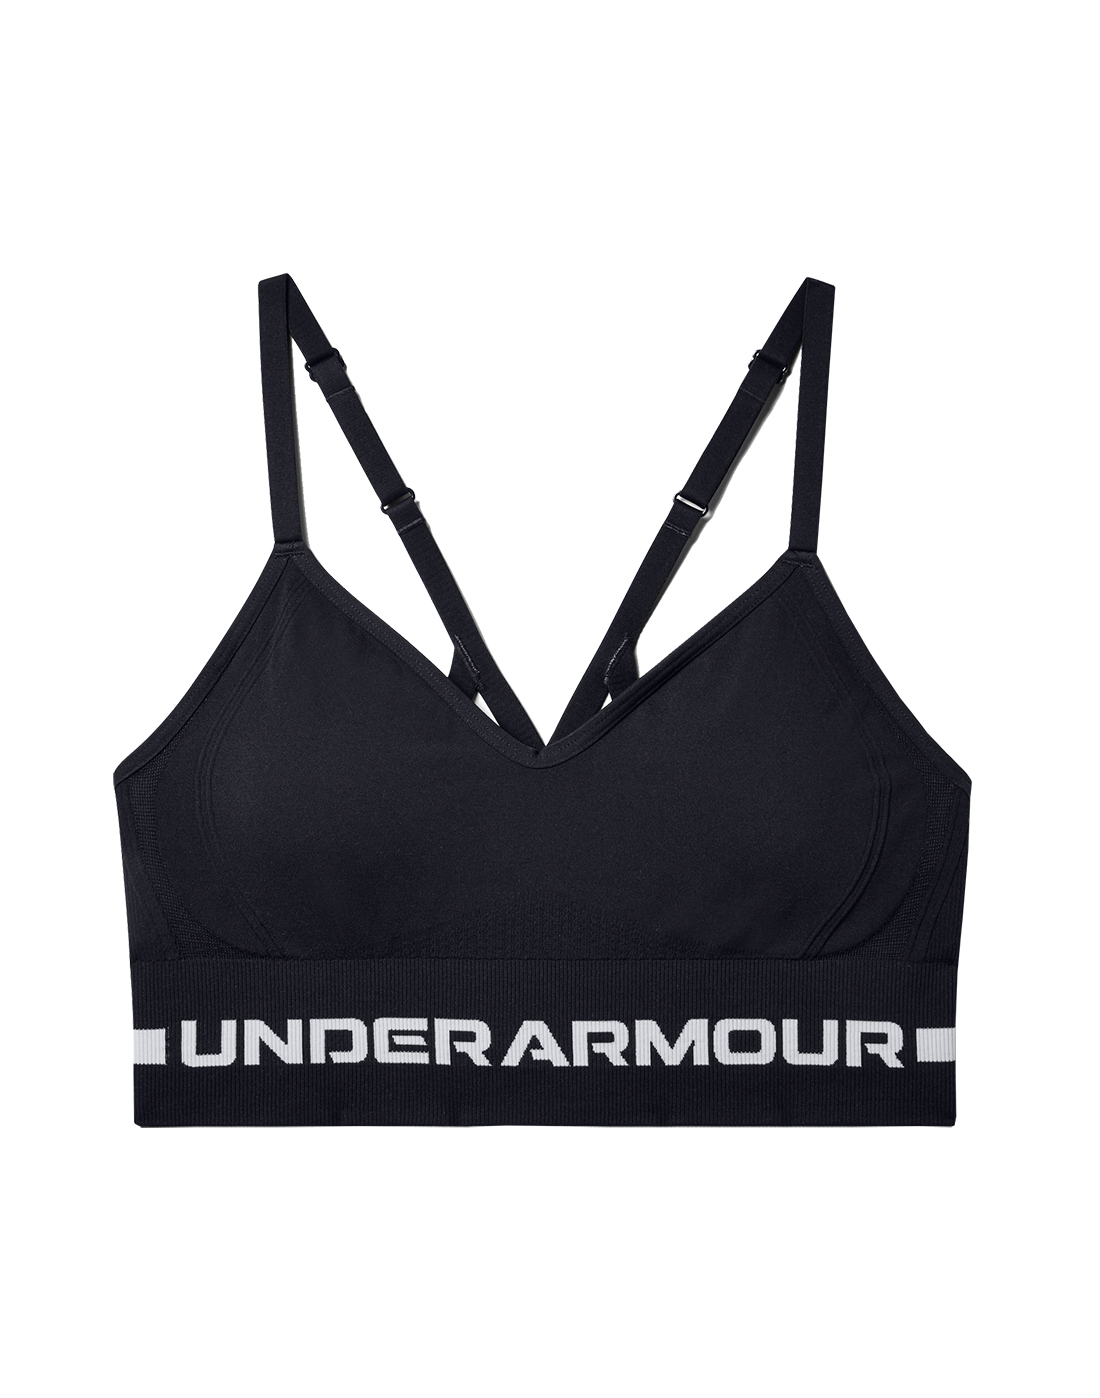 Under Armour Womens Seamless Long Sports Bra - Black | Life Style Sports IE